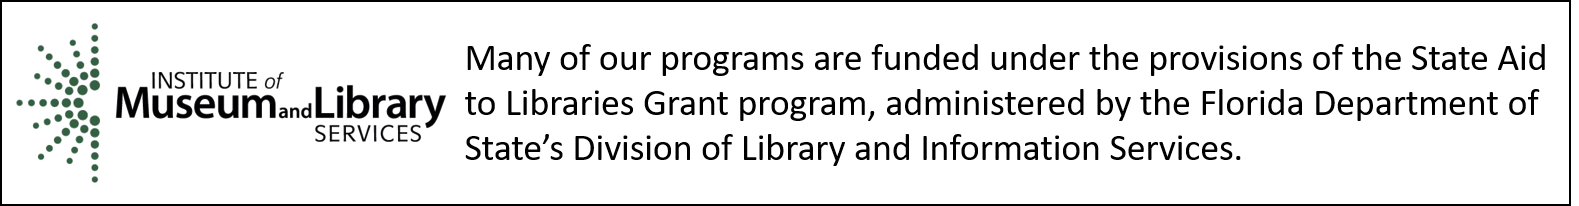 Many of our programs are funded under the provisions of the State Aid to Libraries Grant program, administered by the Florida Department of State’s Division of Library and Information Services.